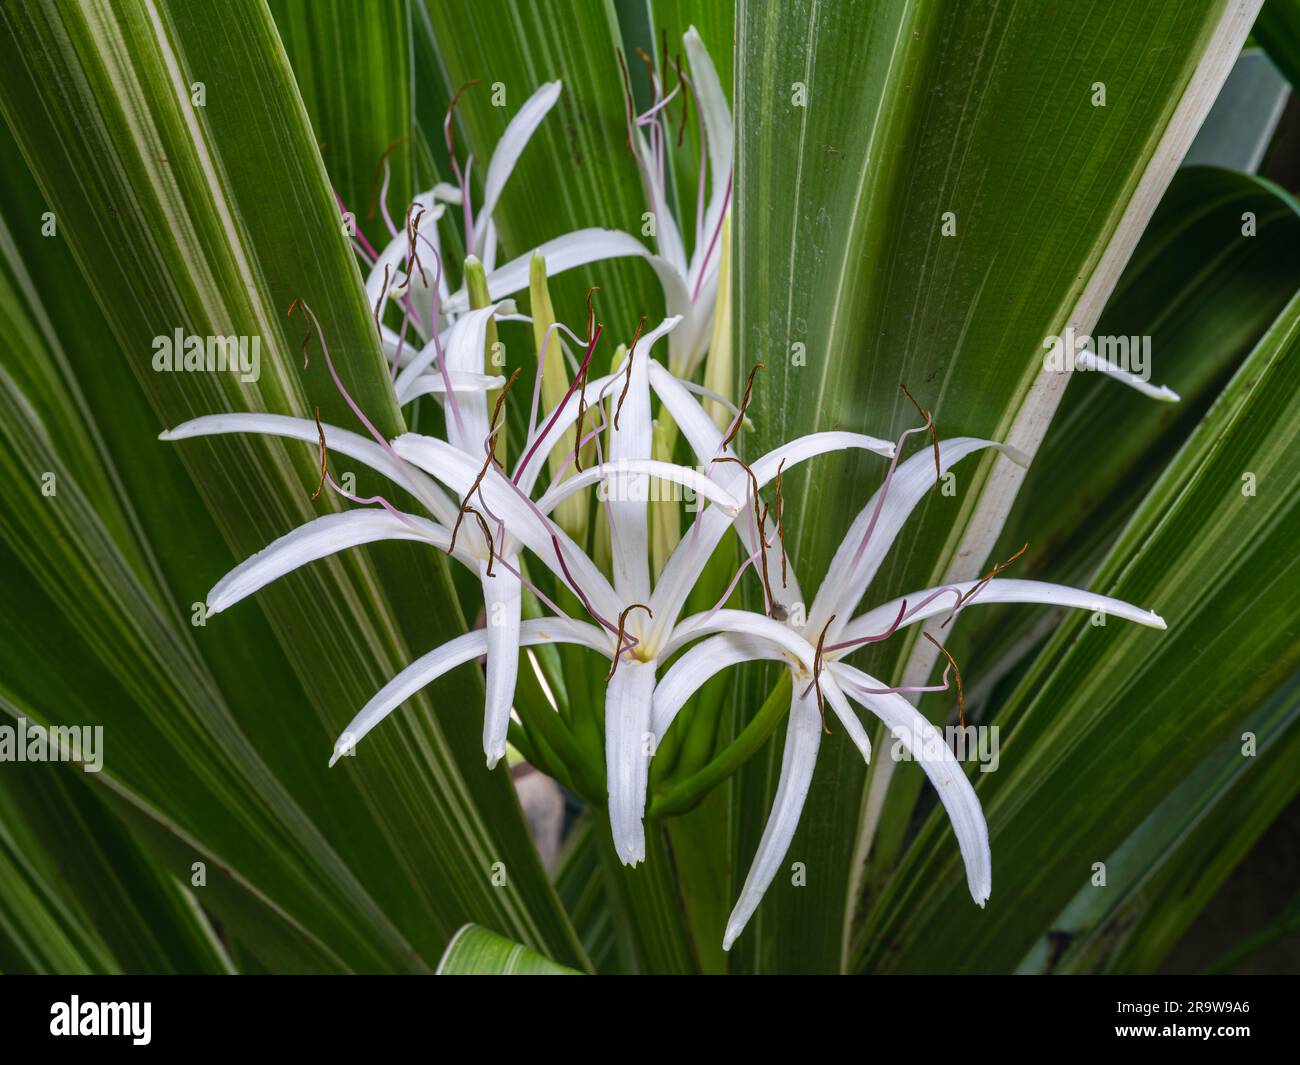 Closeup view of fresh white flowers of crinum asiaticum aka poison bulb, giant crinum lily or spider lily blooming on green foliage natural background Stock Photo